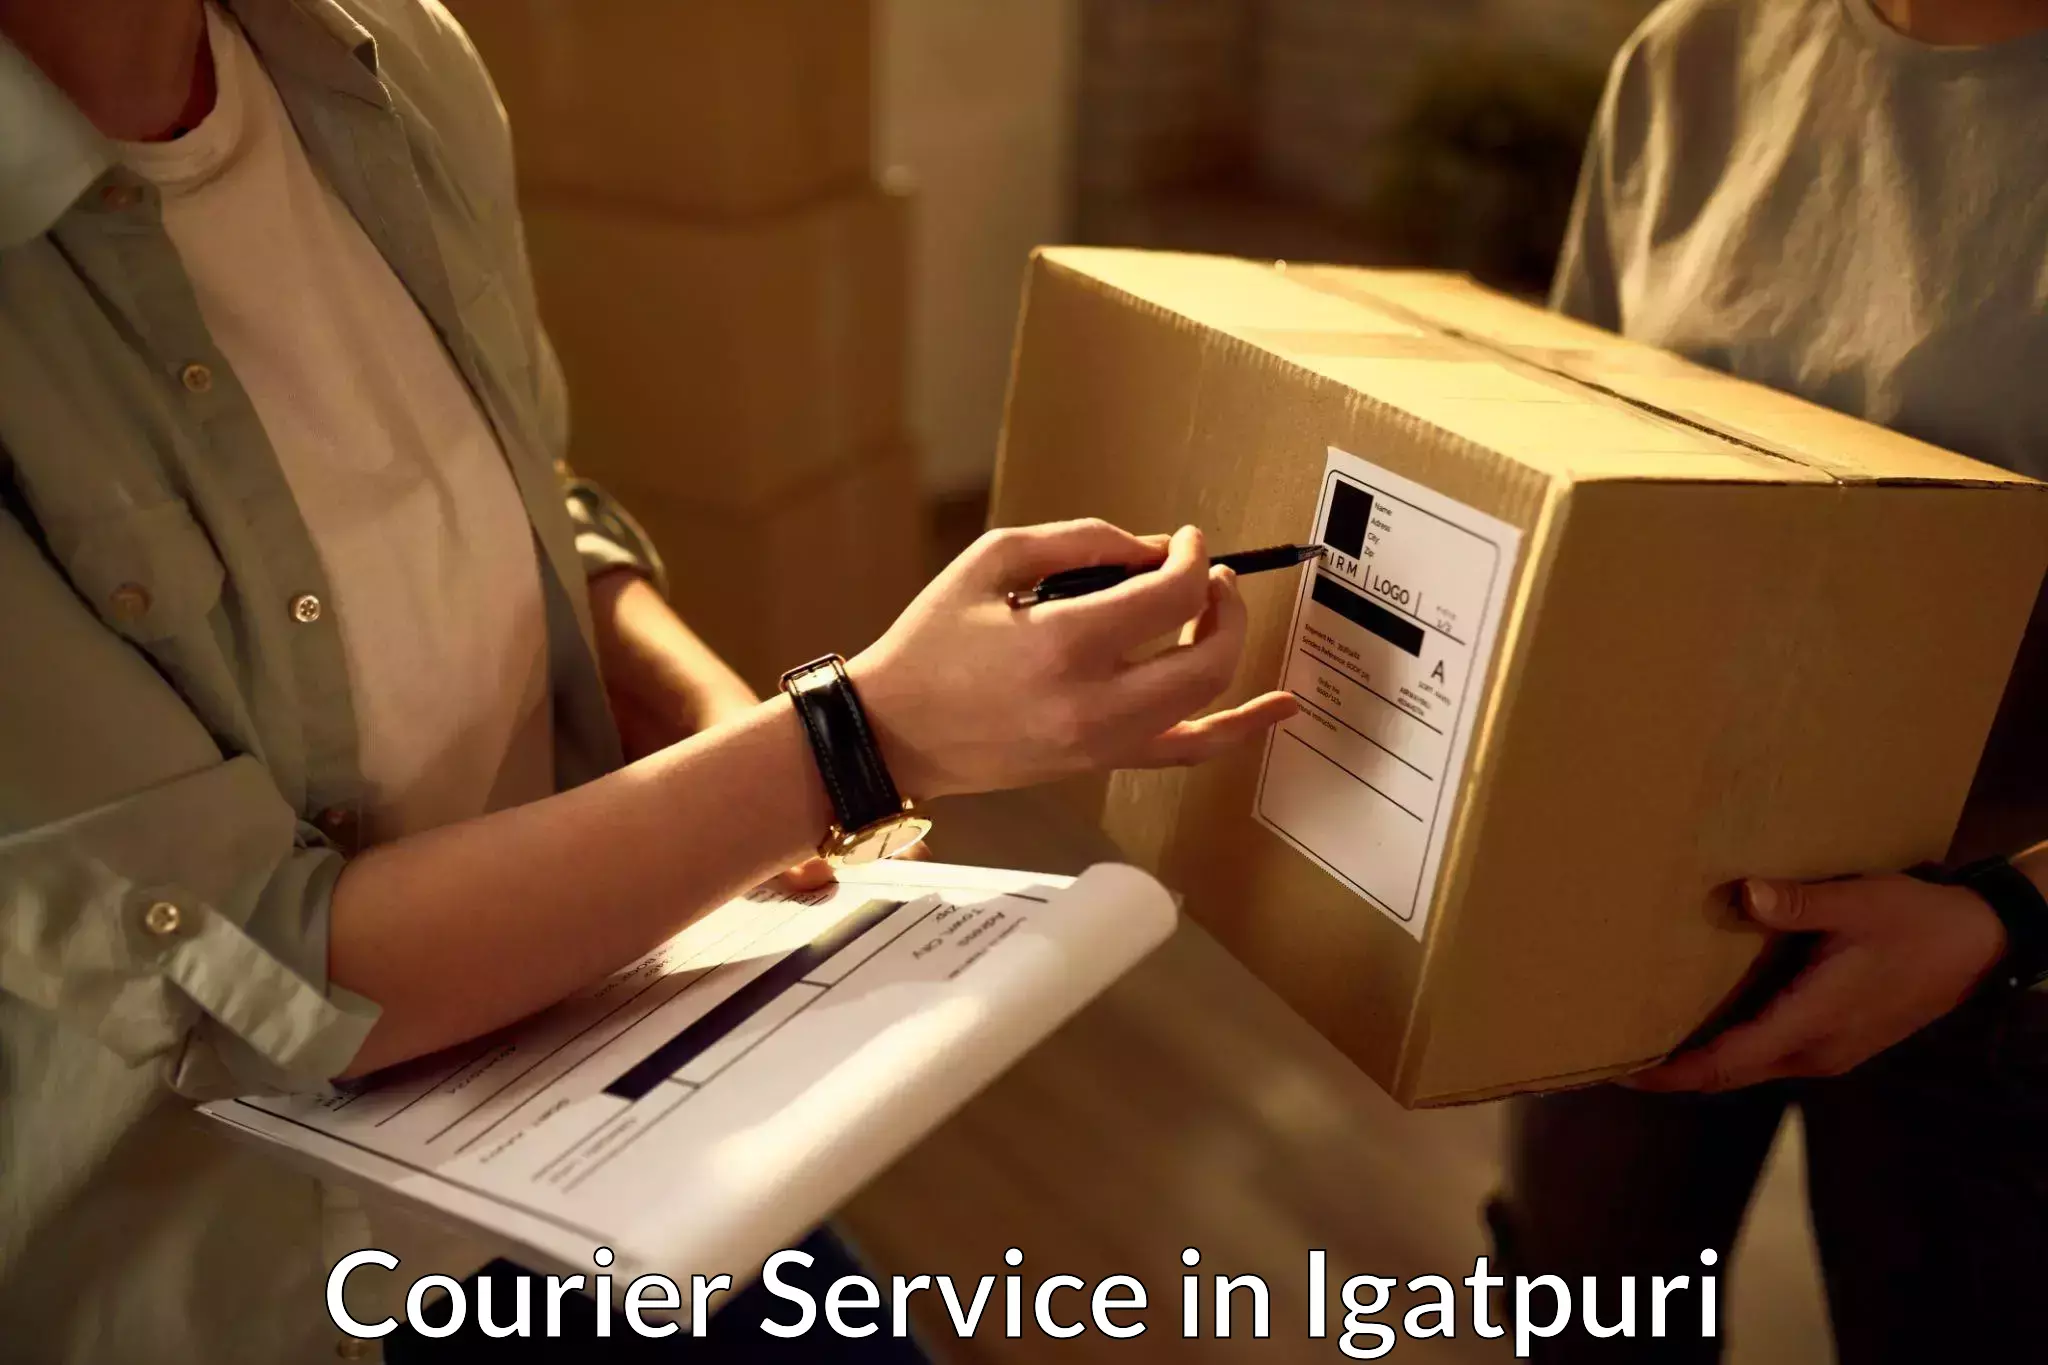 Cash on delivery service in Igatpuri